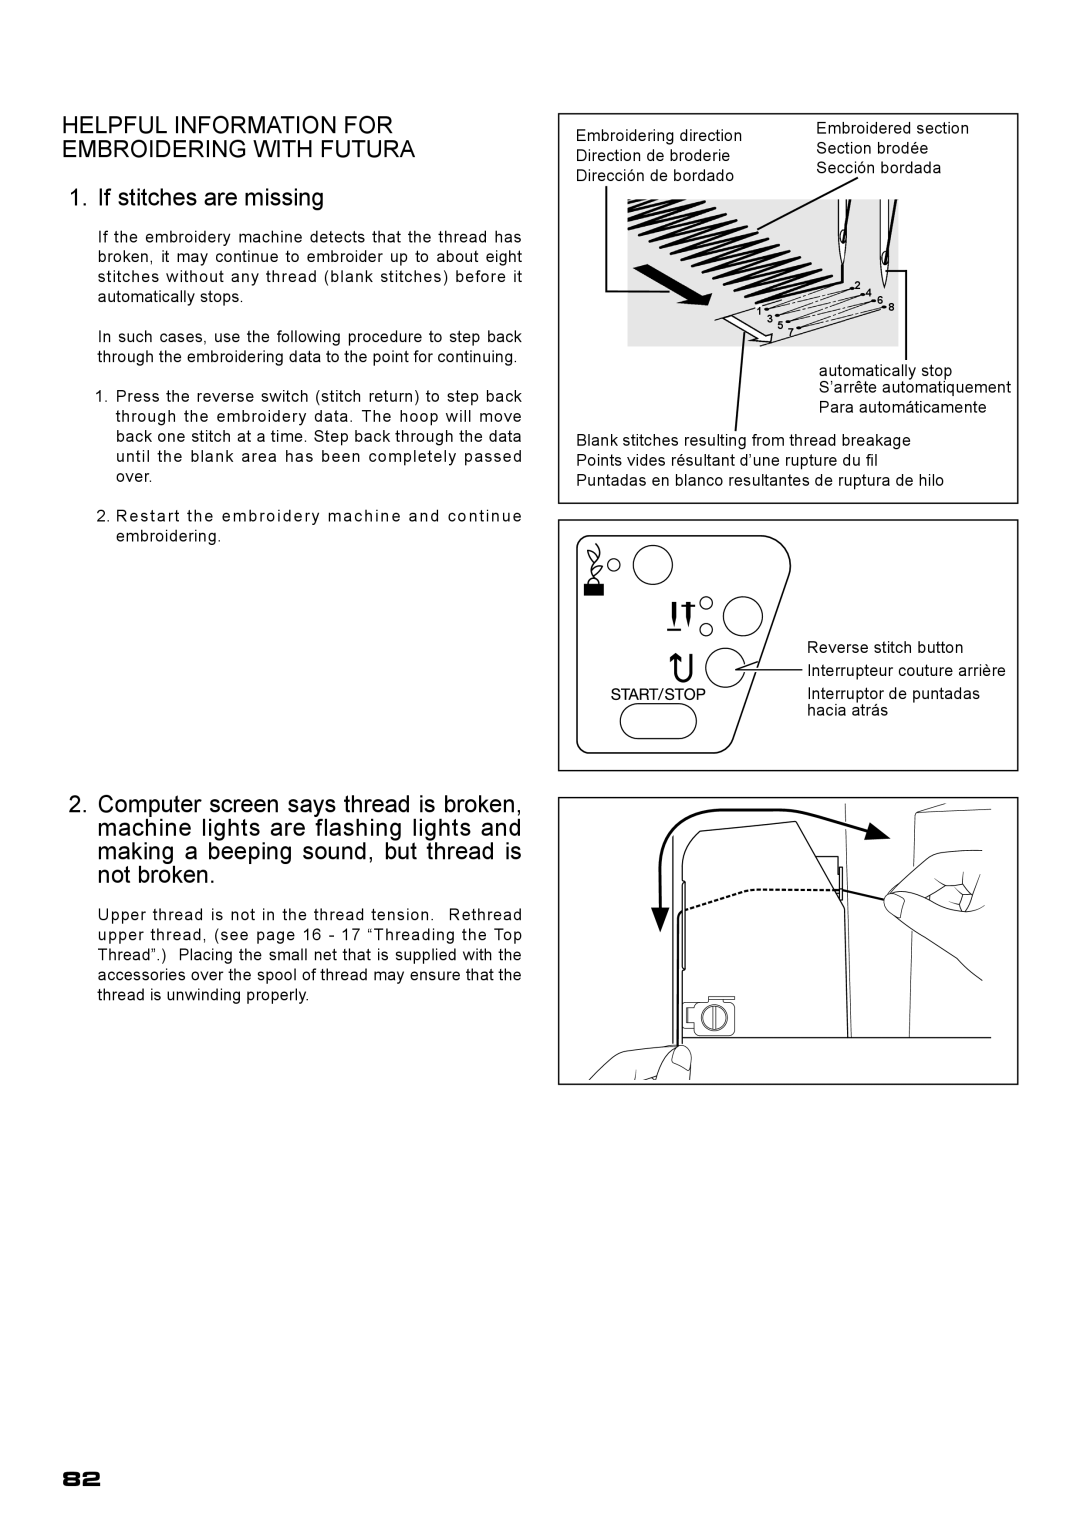 Singer XL-400 instruction manual Helpful Information For Embroidering With Futura, If stitches are missing 